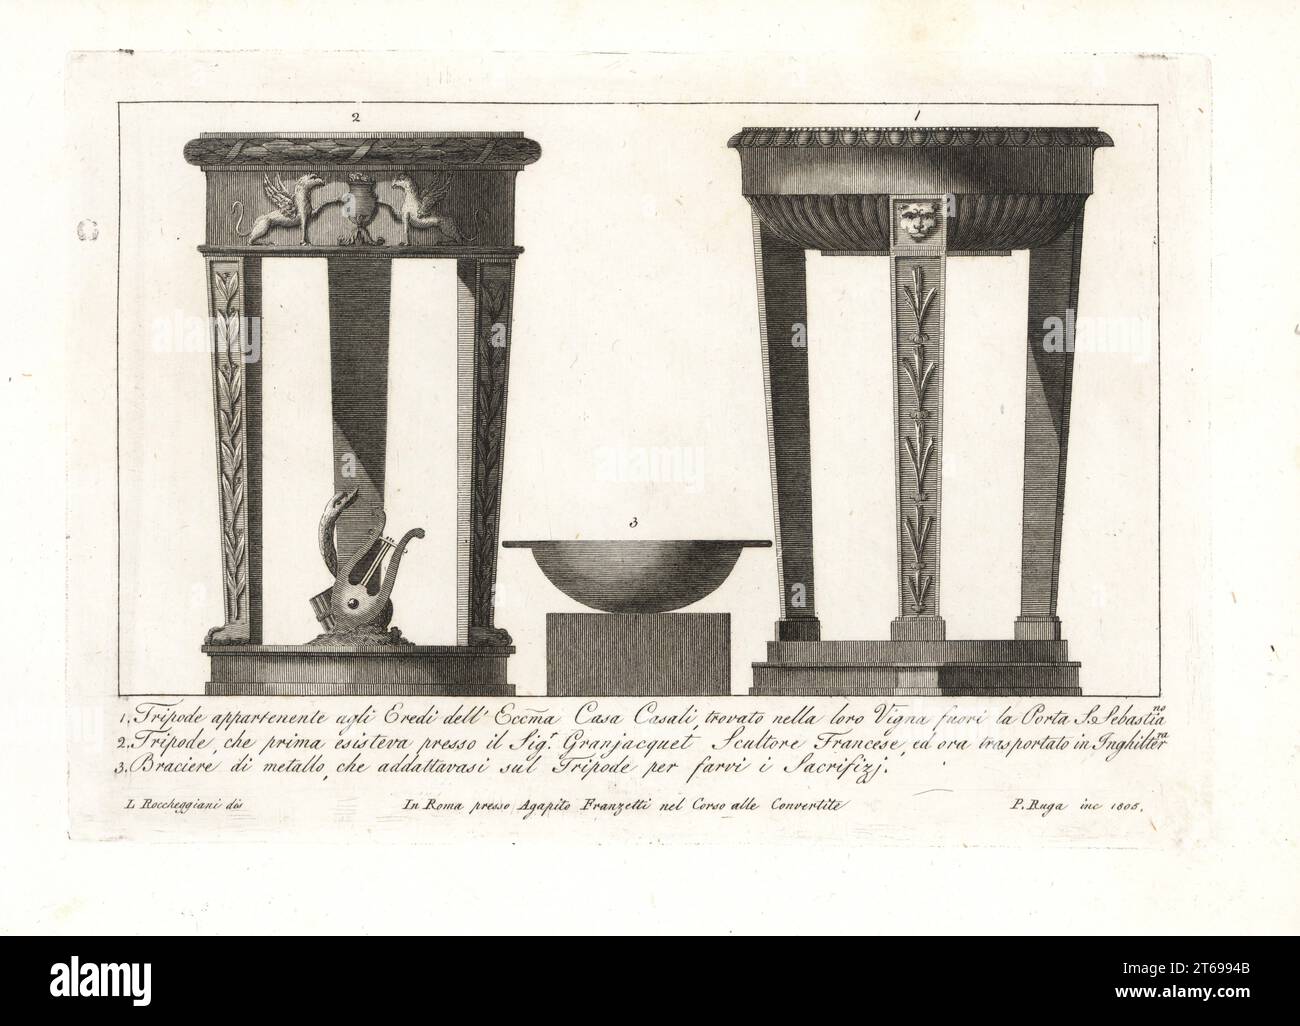 Tripod belonging to the Heirs of the Ecoma, Casa Casali, found in their vineyard outside the Porta San Sebastiono, Rome 1, tripod owned by French sculptor Antoine-Guillaume Granjacquet 2, and metal brazier for sacrifices 3. Copperplate engraving by Pietro Ruga after an illustration by Lorenzo Rocceggiani from his own 100 Plates of Costumes Religious, Civil and Military of the Ancient Egyptians, Etruscans, Greeks and Romans, Franzetti, Rome, 1802. Stock Photo